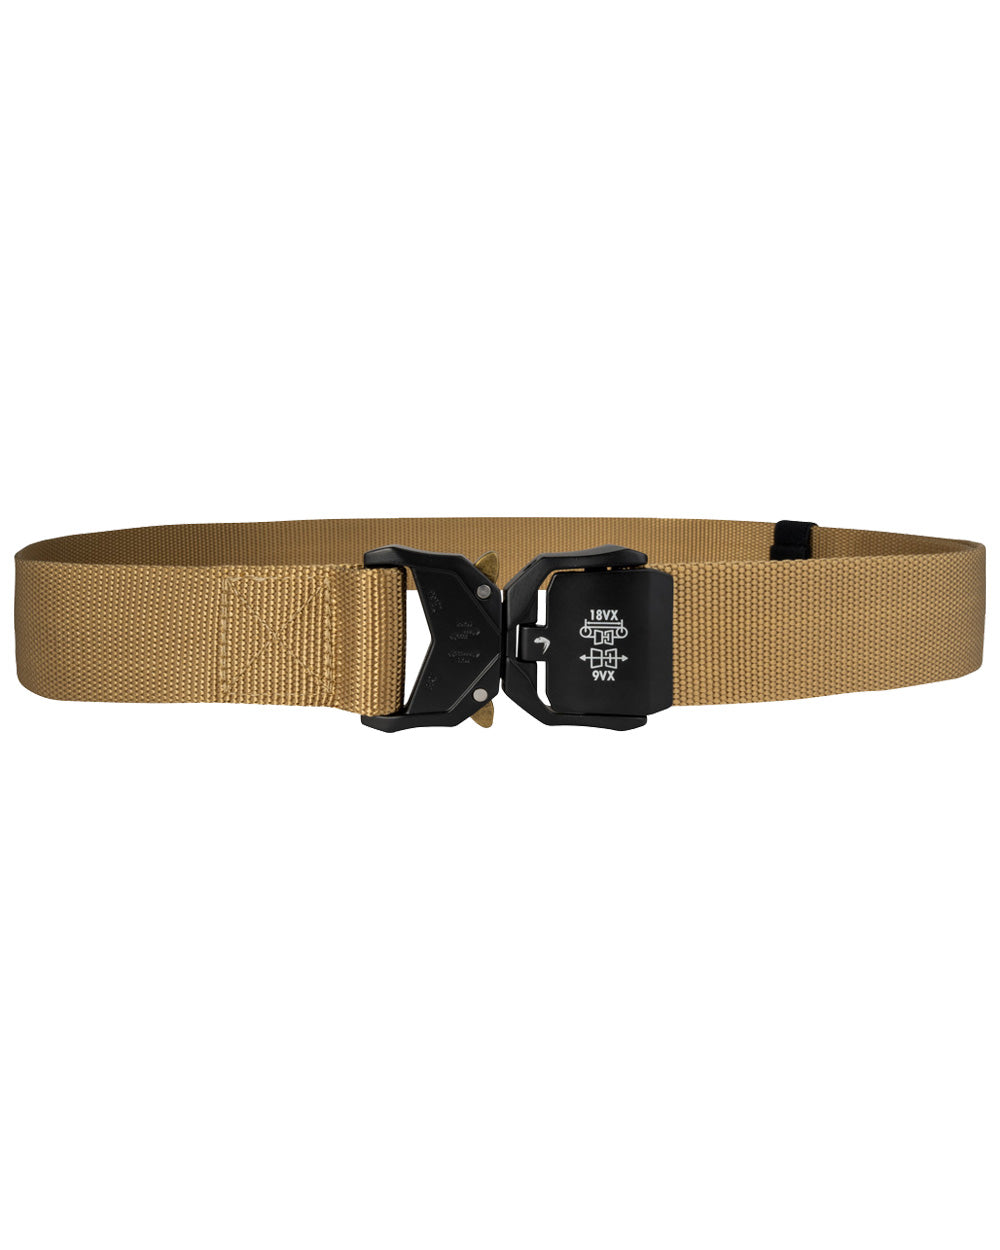 Coyote coloured Viper Fast Belt on White Background 